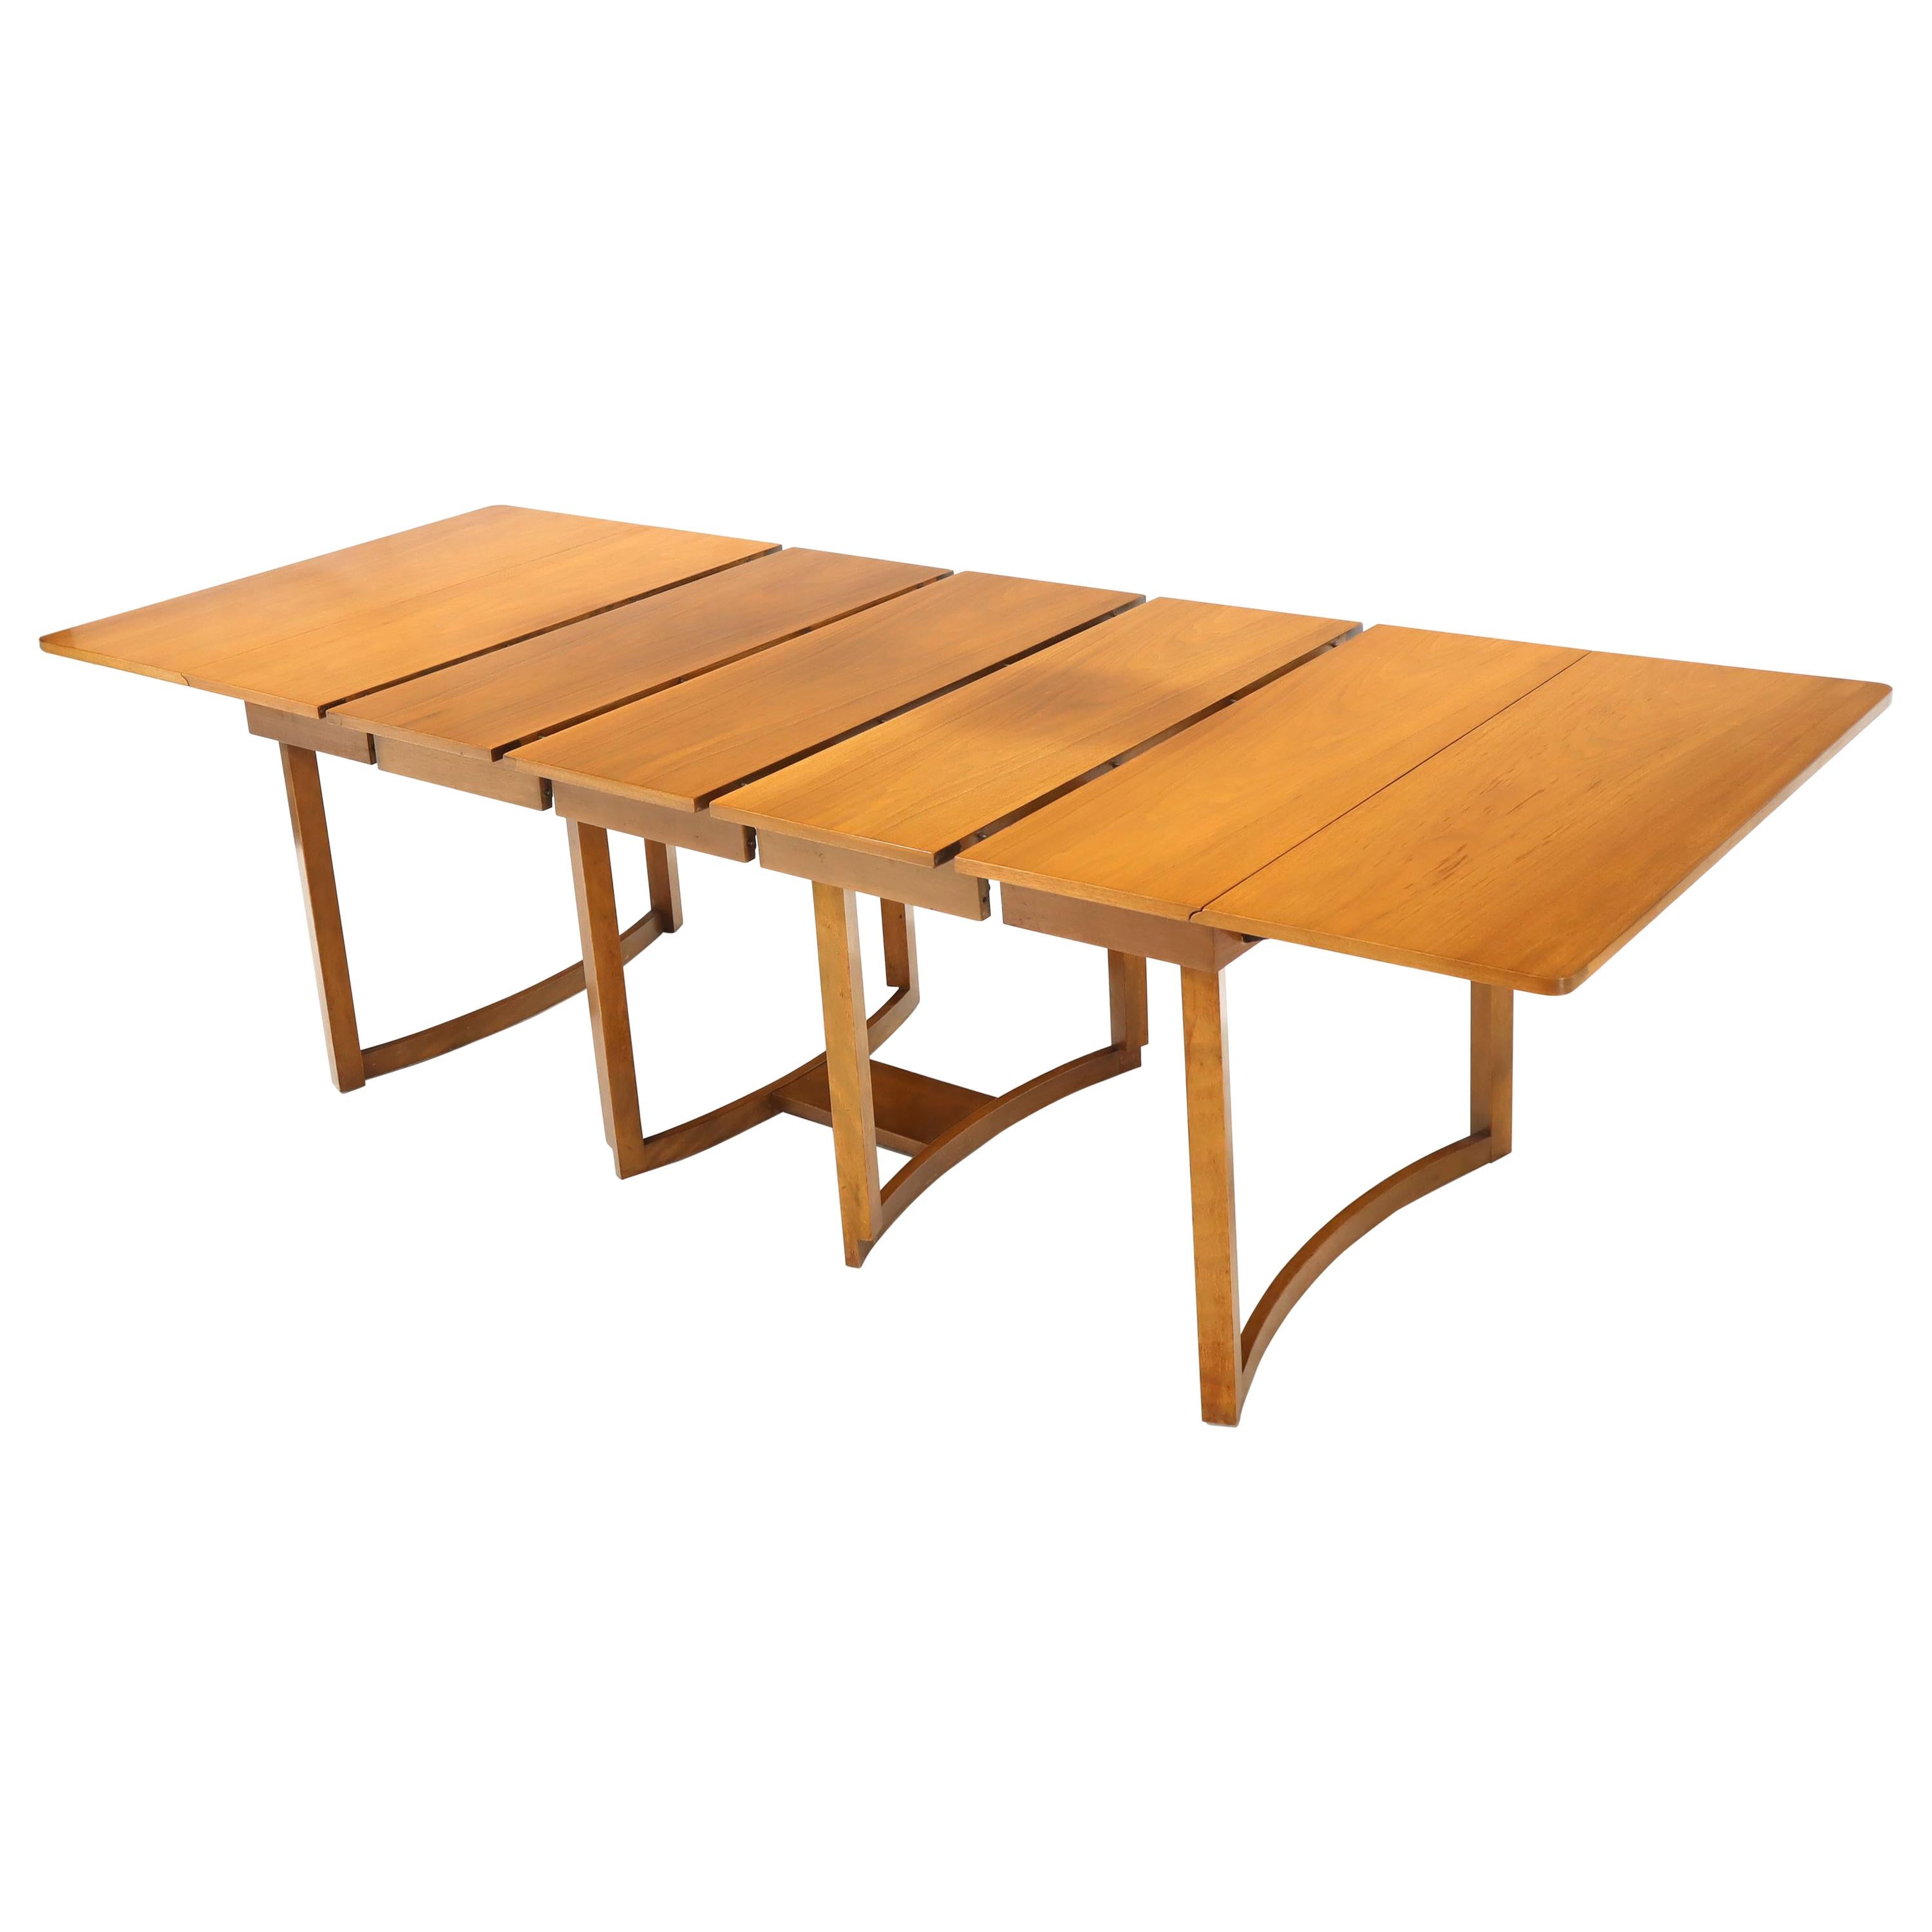 Midcentury Light Walnut Drop Leaf Expandable Dining Table, Three Leafs Boards im Angebot